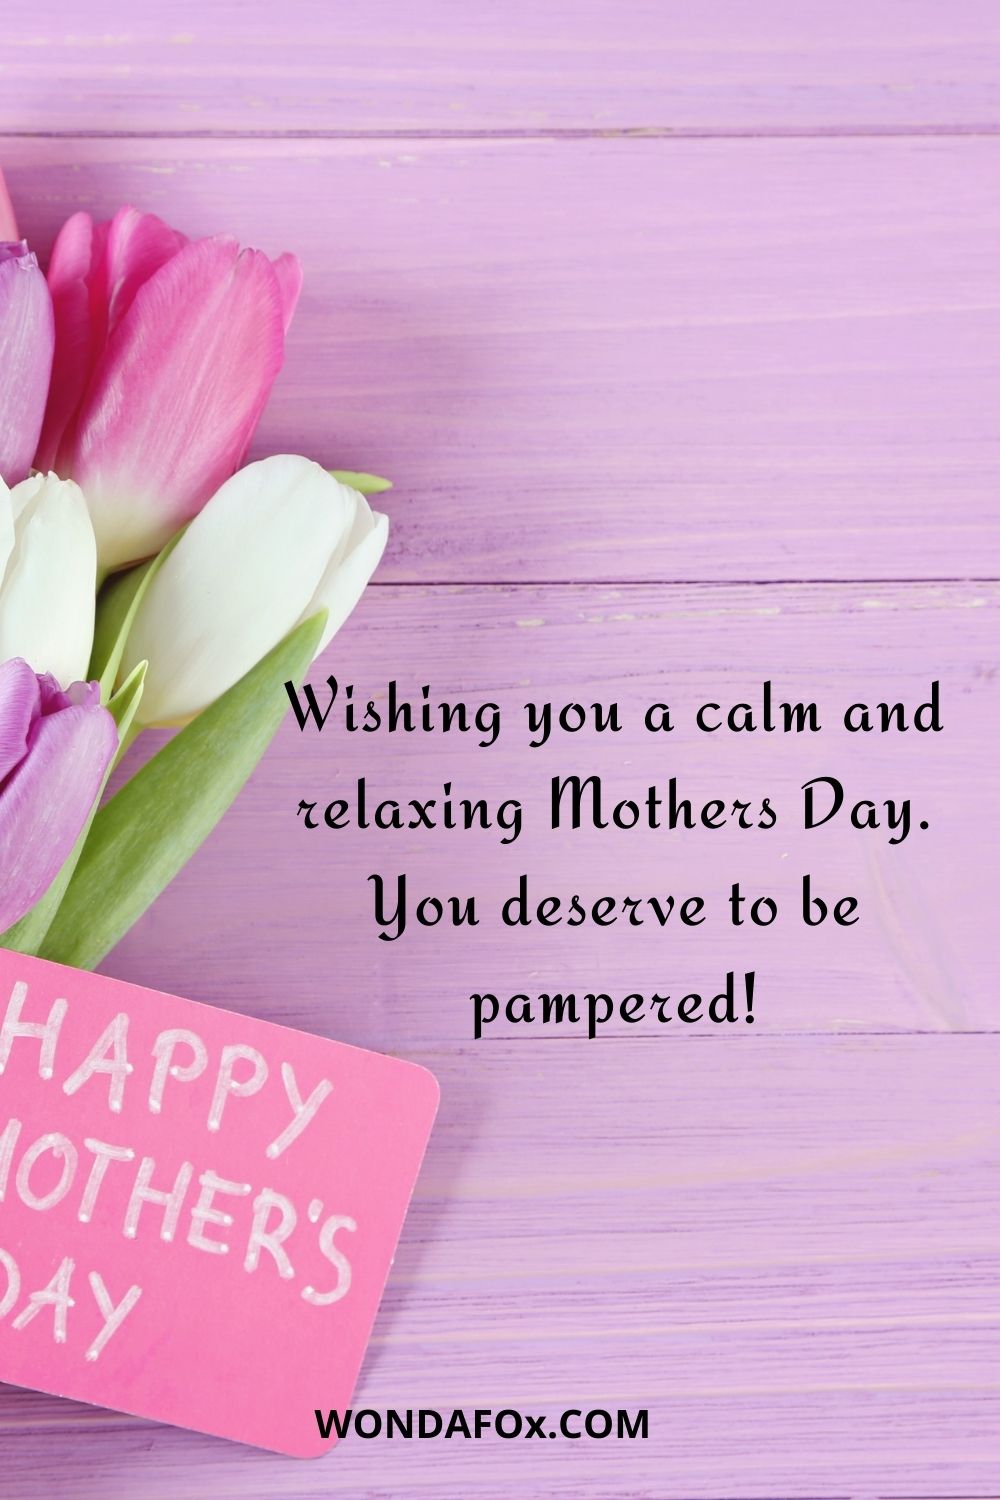 Wishing you a calm and relaxing Mothers Day. You deserve to be pampered!